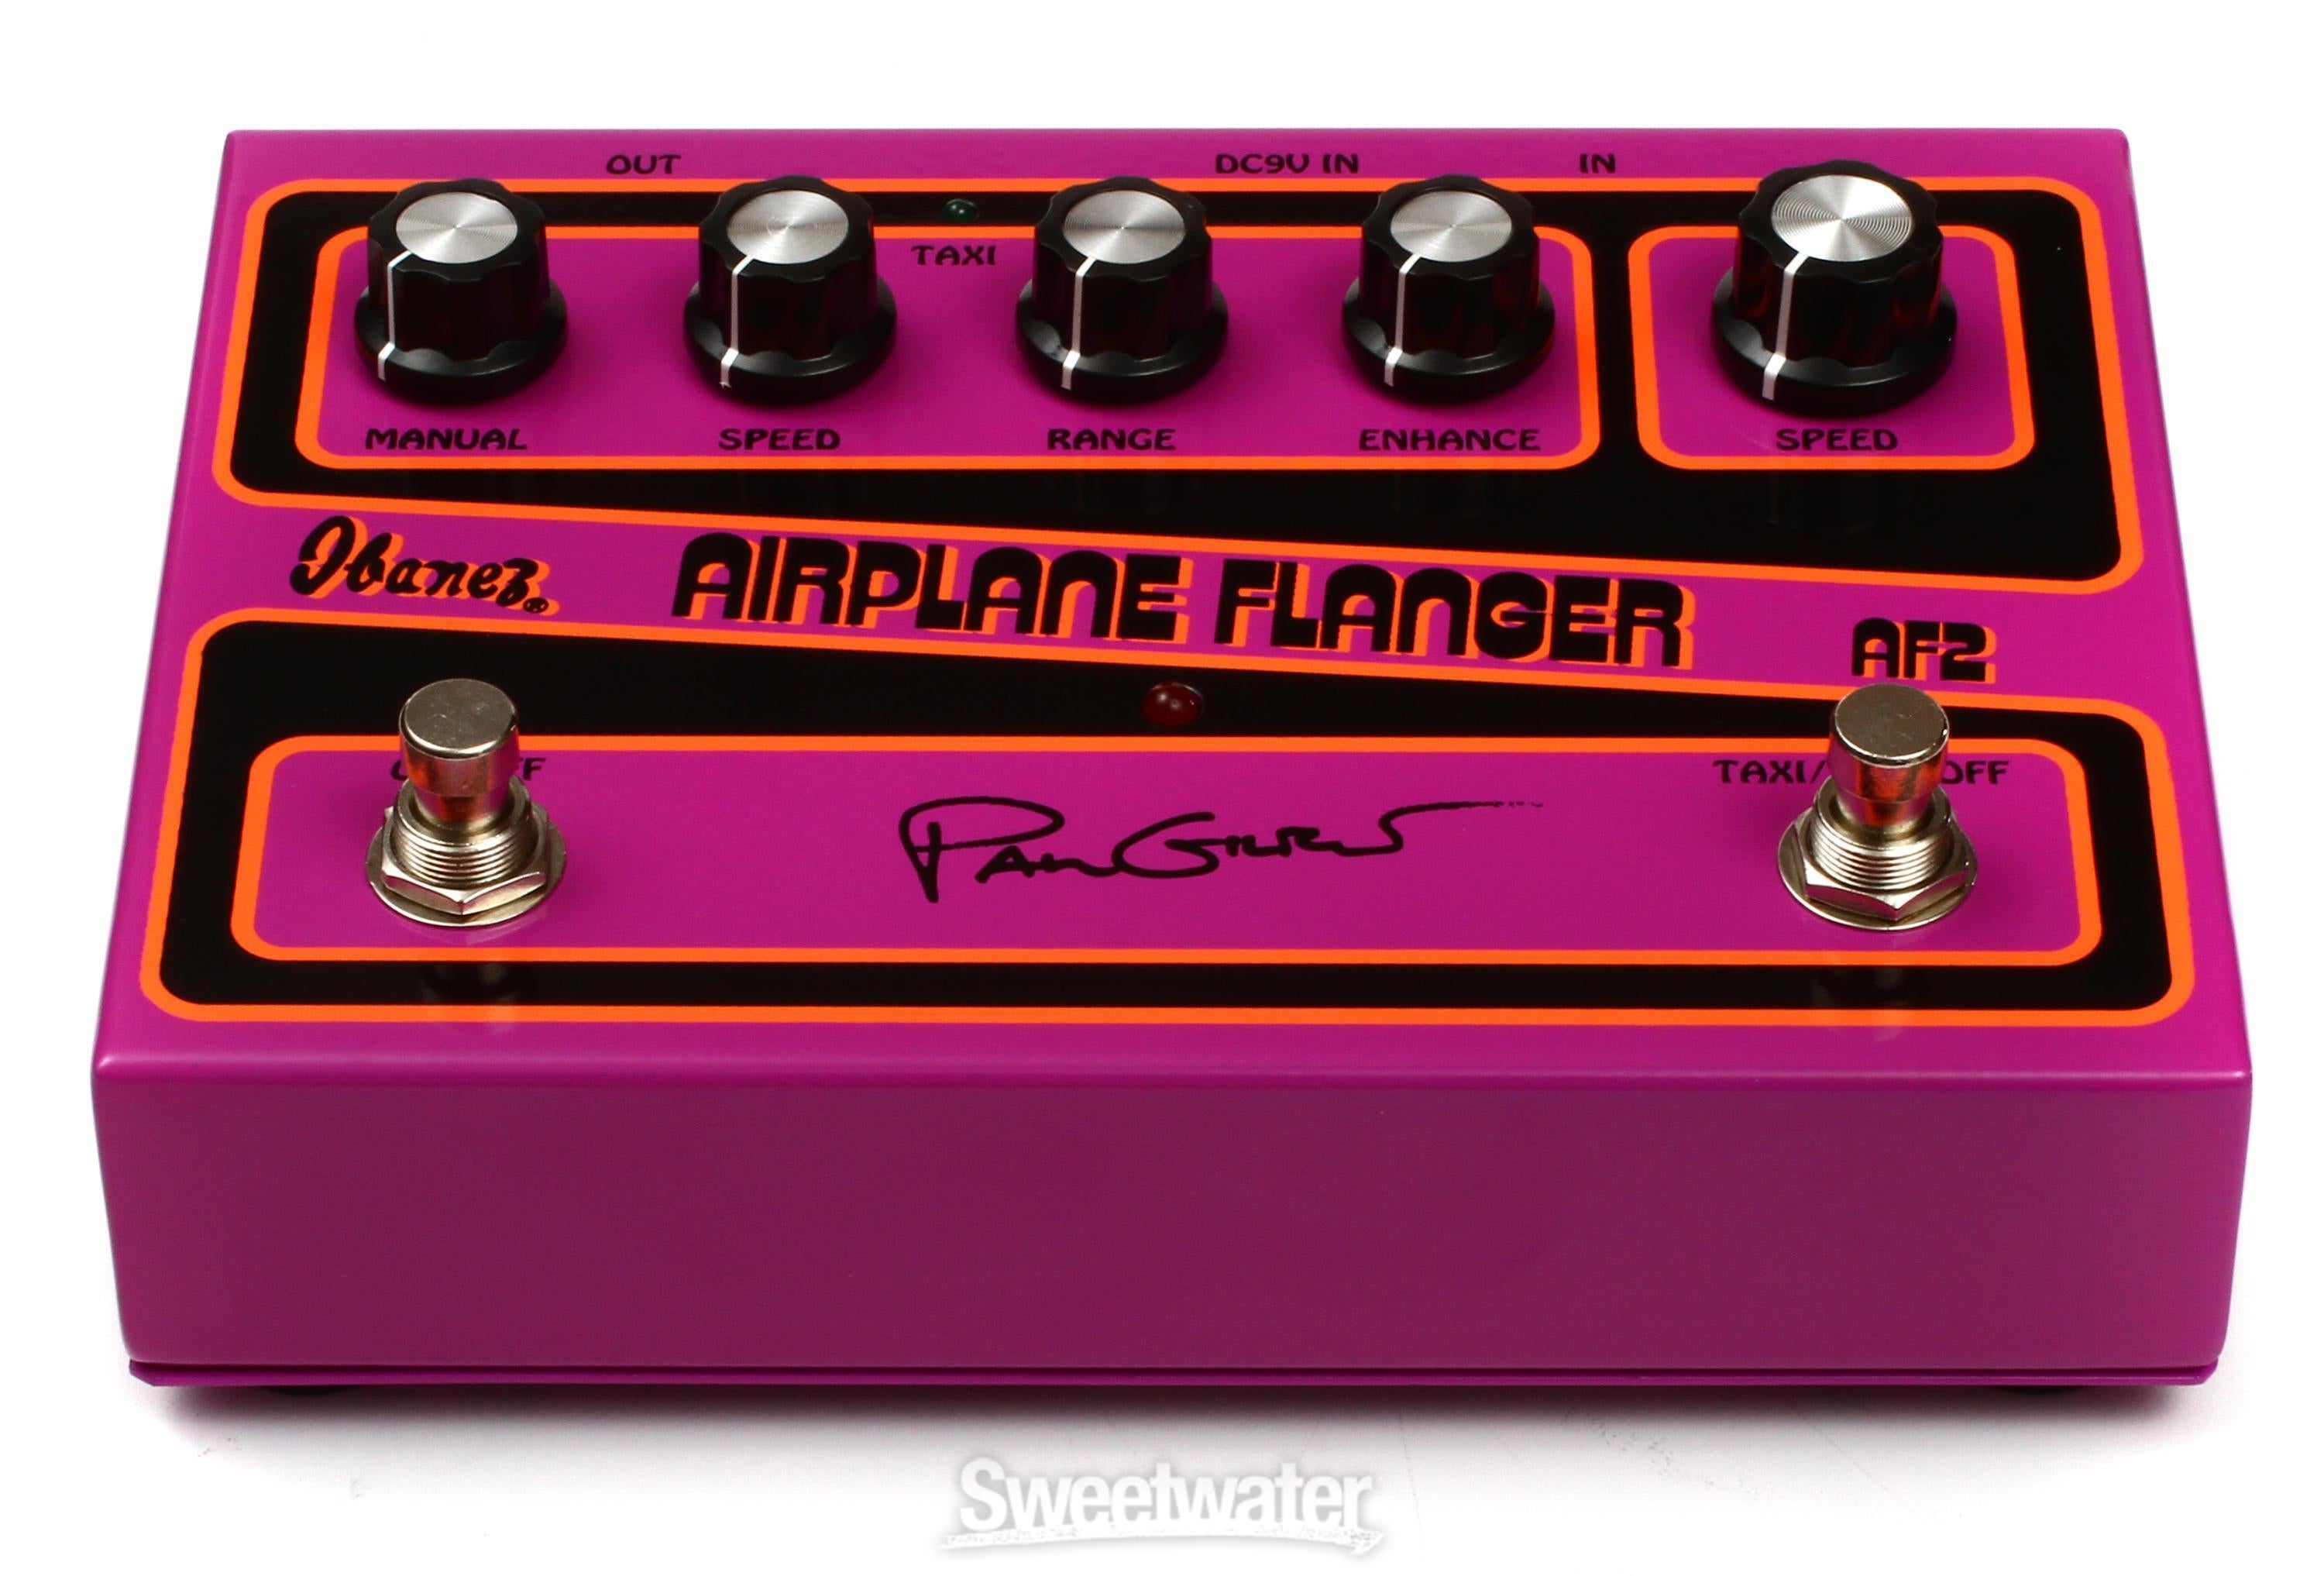 Ibanez AF2 Paul Gilbert Signature AIRPLANE Flanger Pedal | Sweetwater